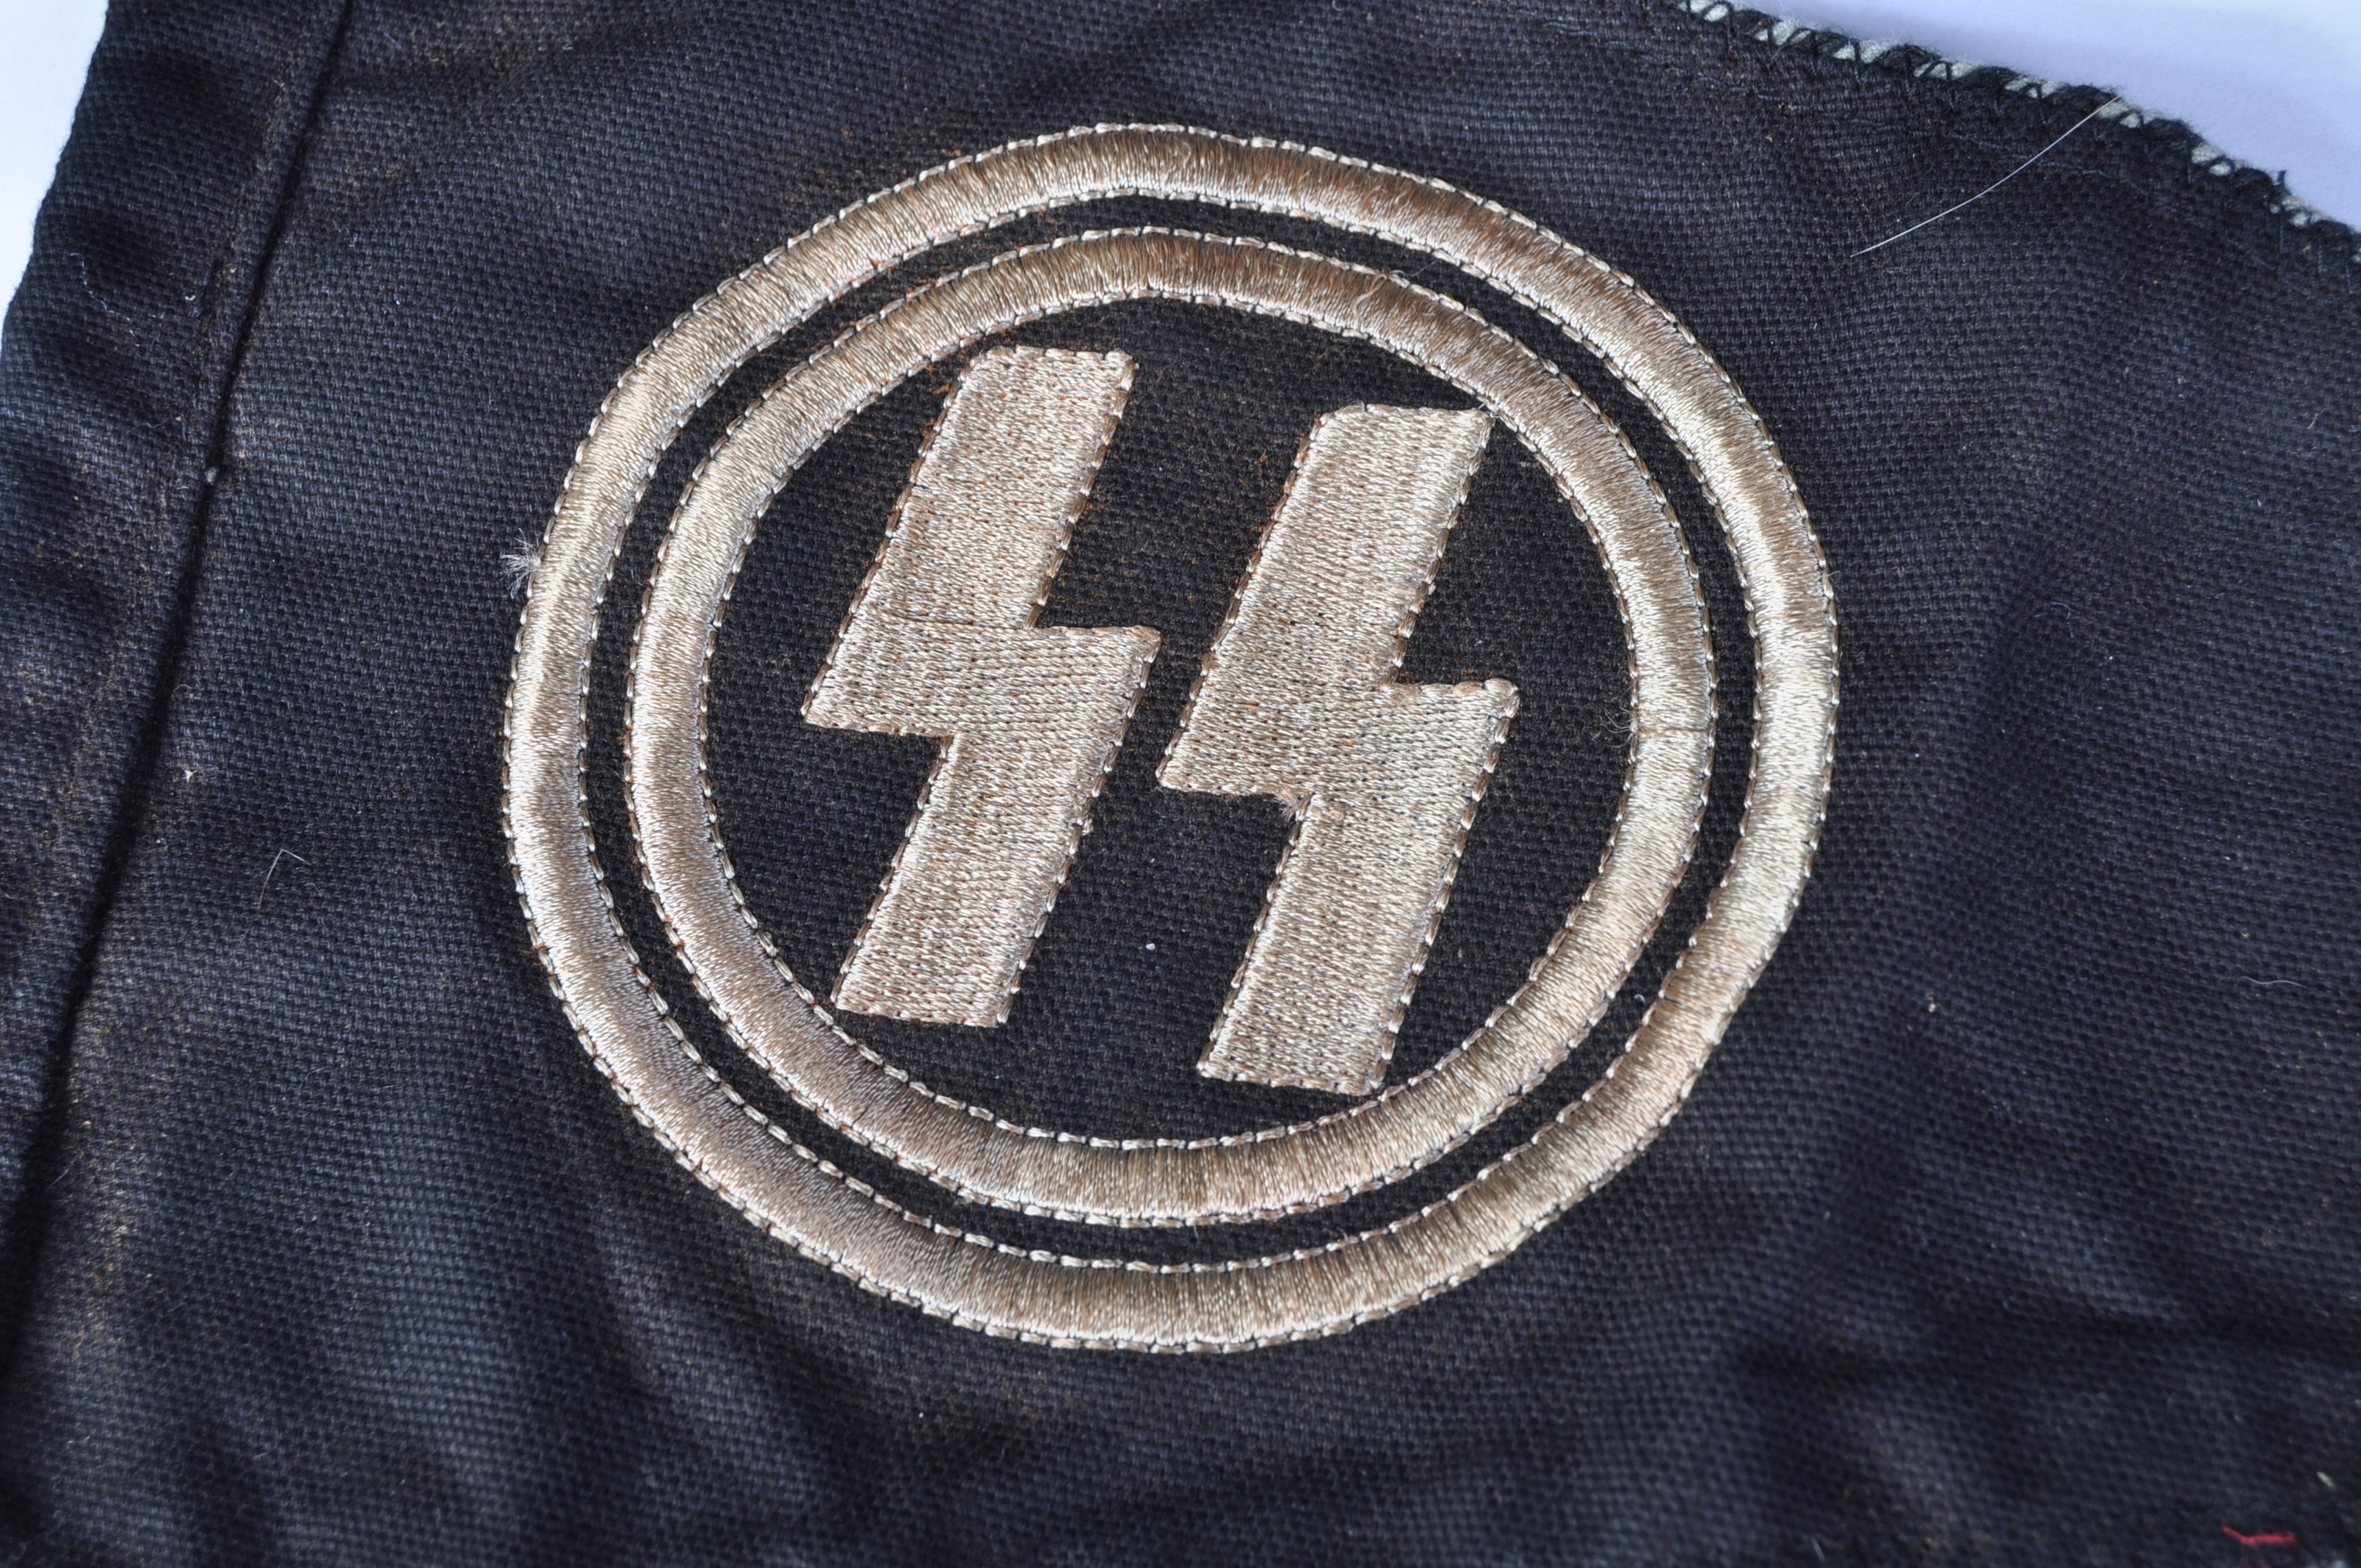 WWII SECOND WORLD WAR GERMAN THIRD REICH SS OFFICERS CAR PENNANT - Image 2 of 3